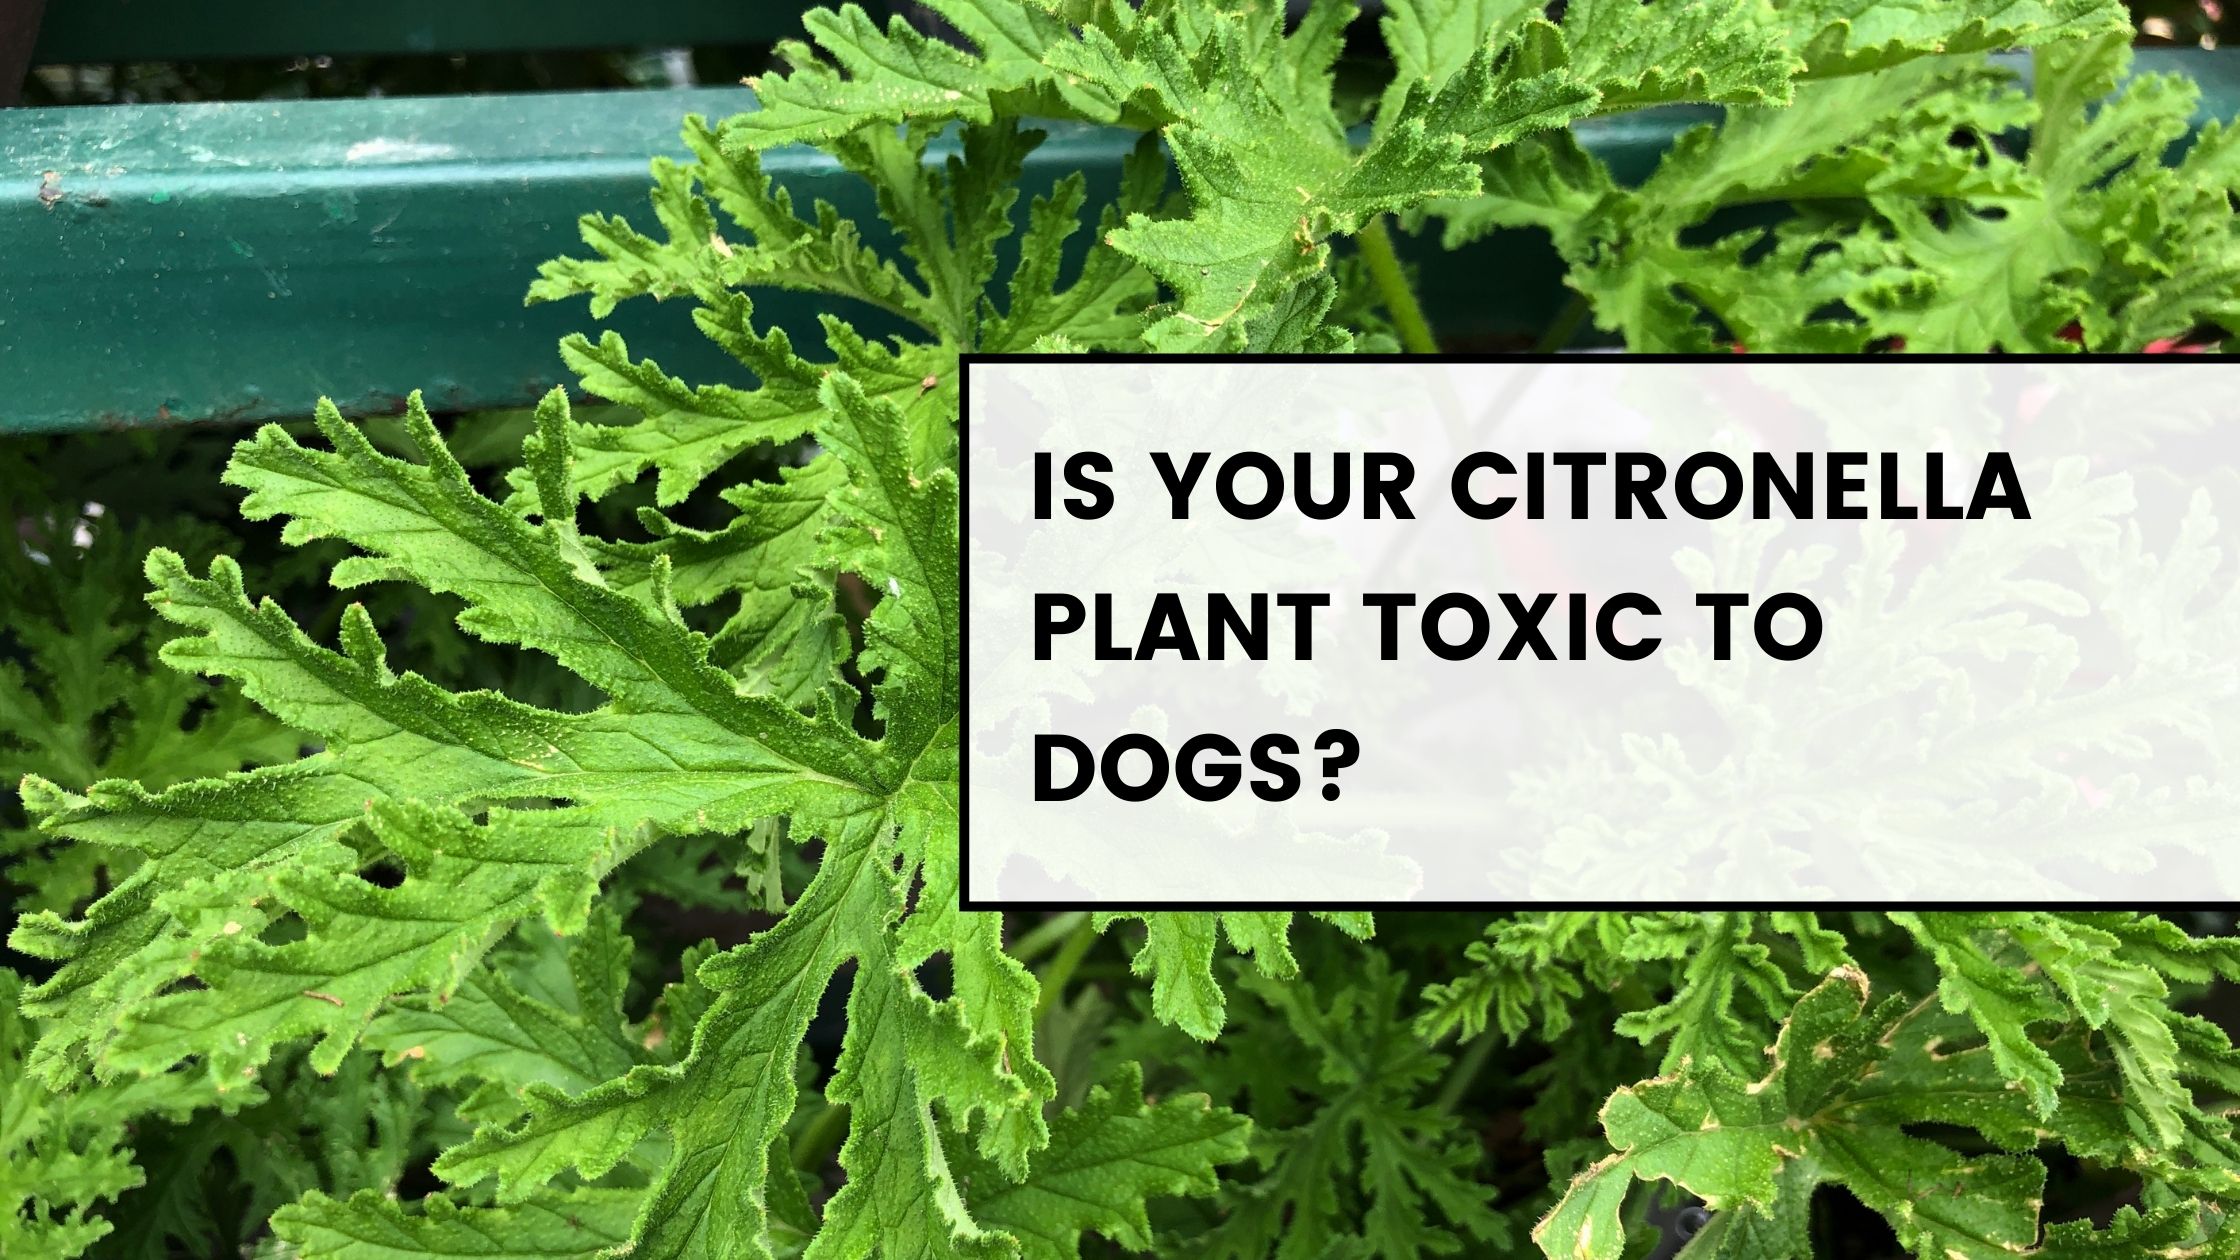 Is Your Citronella Plant Toxic to Dogs